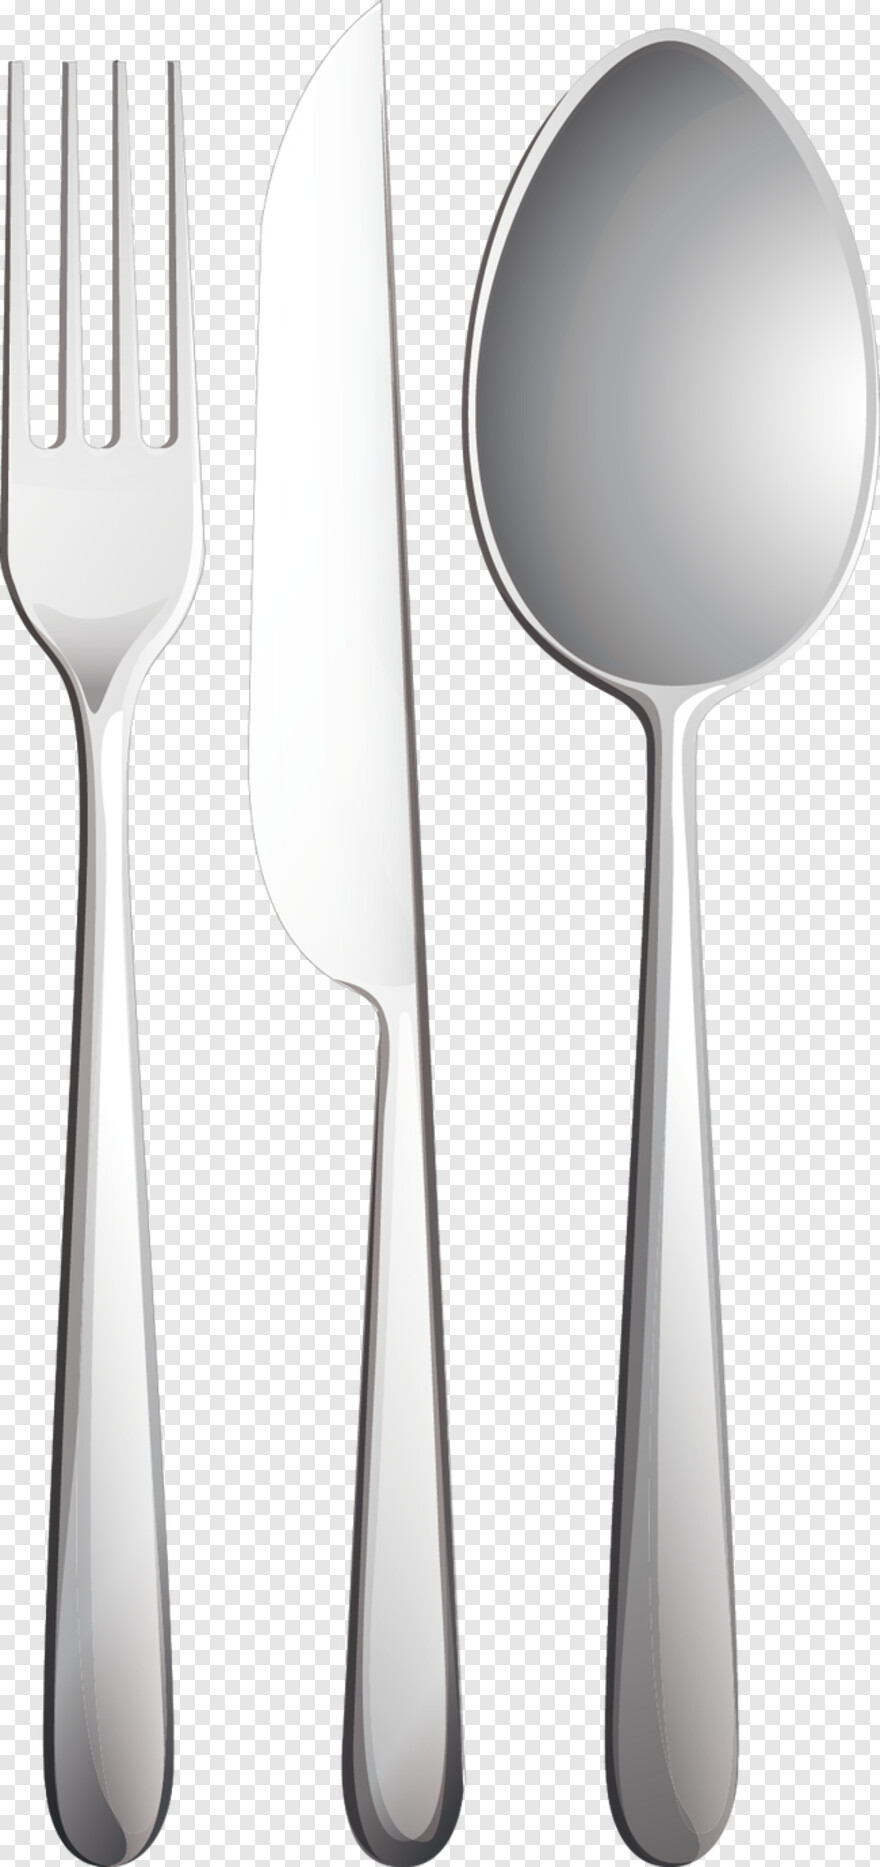 fork-and-knife # 931848